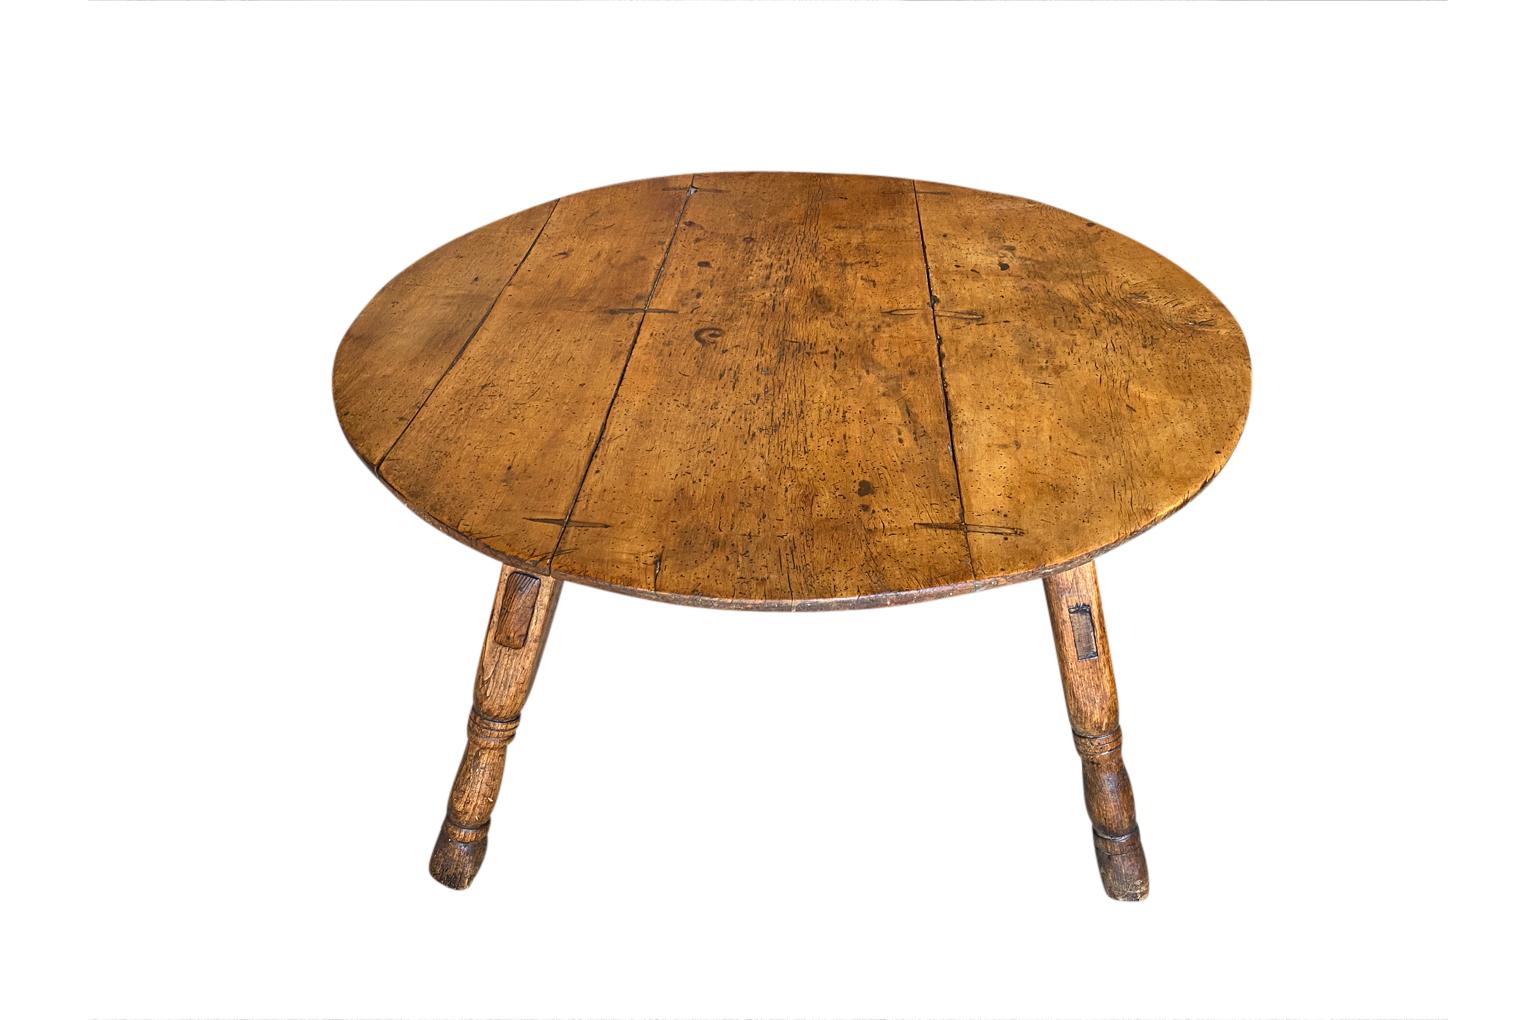 A truly outstanding 18th century Table Vigneron - Wine Tasting Table from Switzerland.  Beautifully constructed from richly stained beech and pine with wonderful tilting top and wonderfully shaped legs.  Excellent patina.